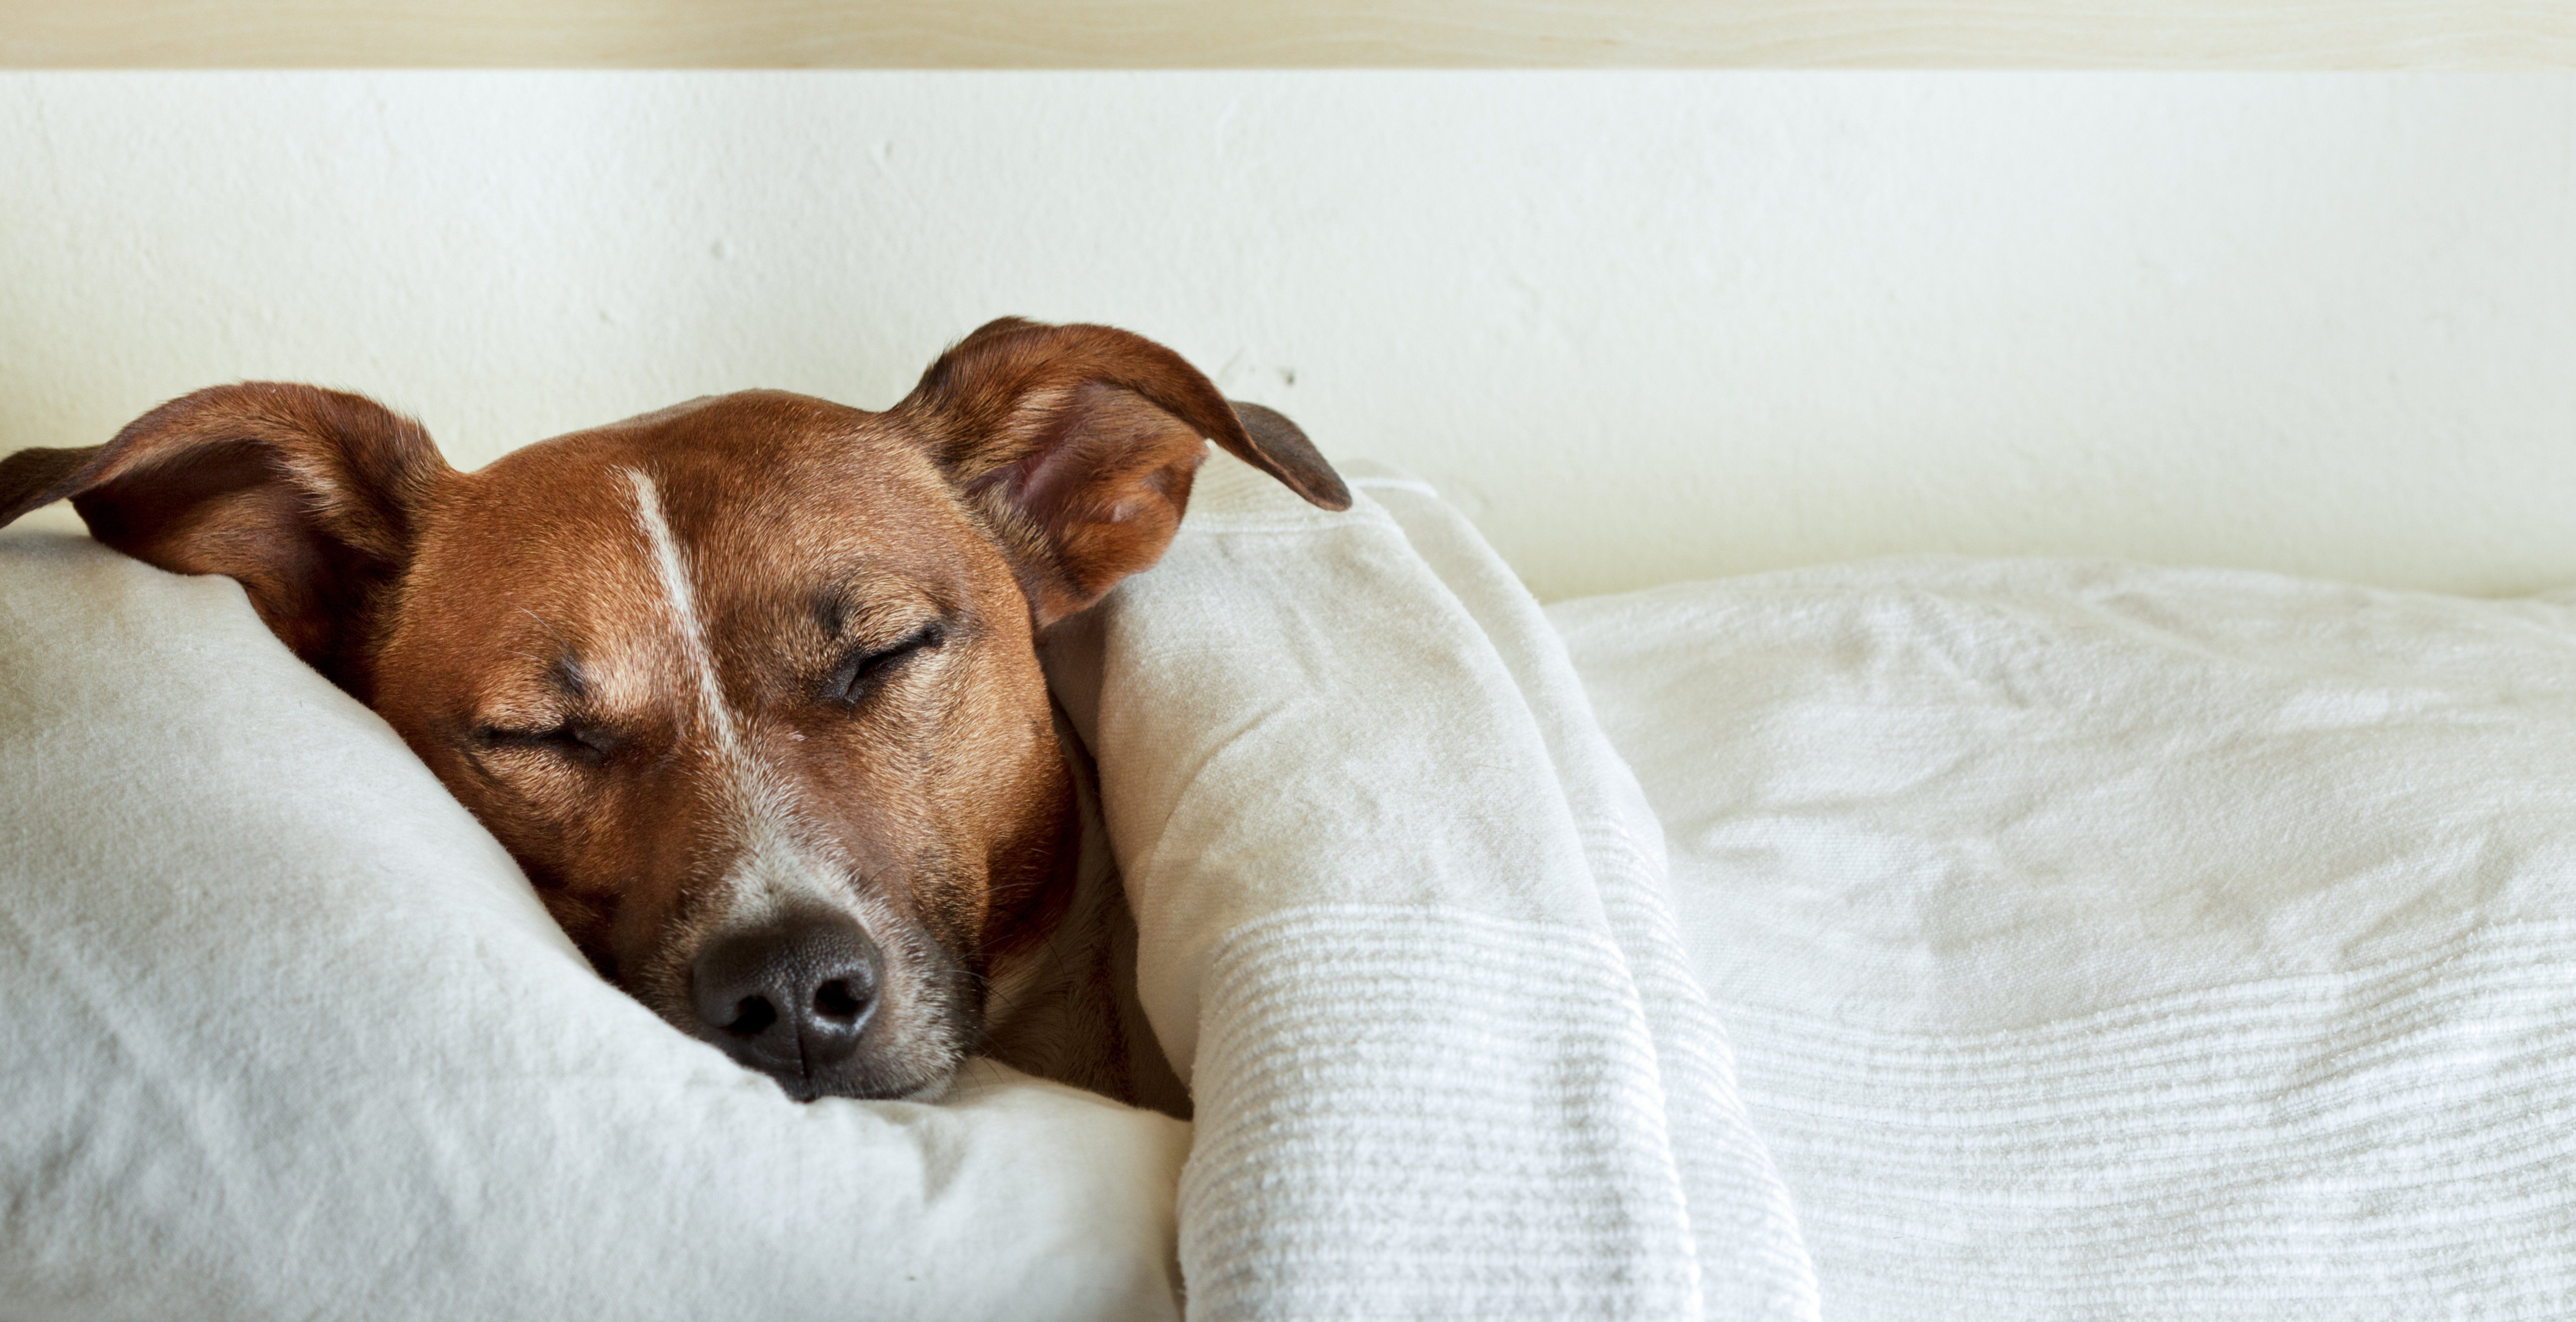 How to Care for Your Dog After Orthopedic Surgery